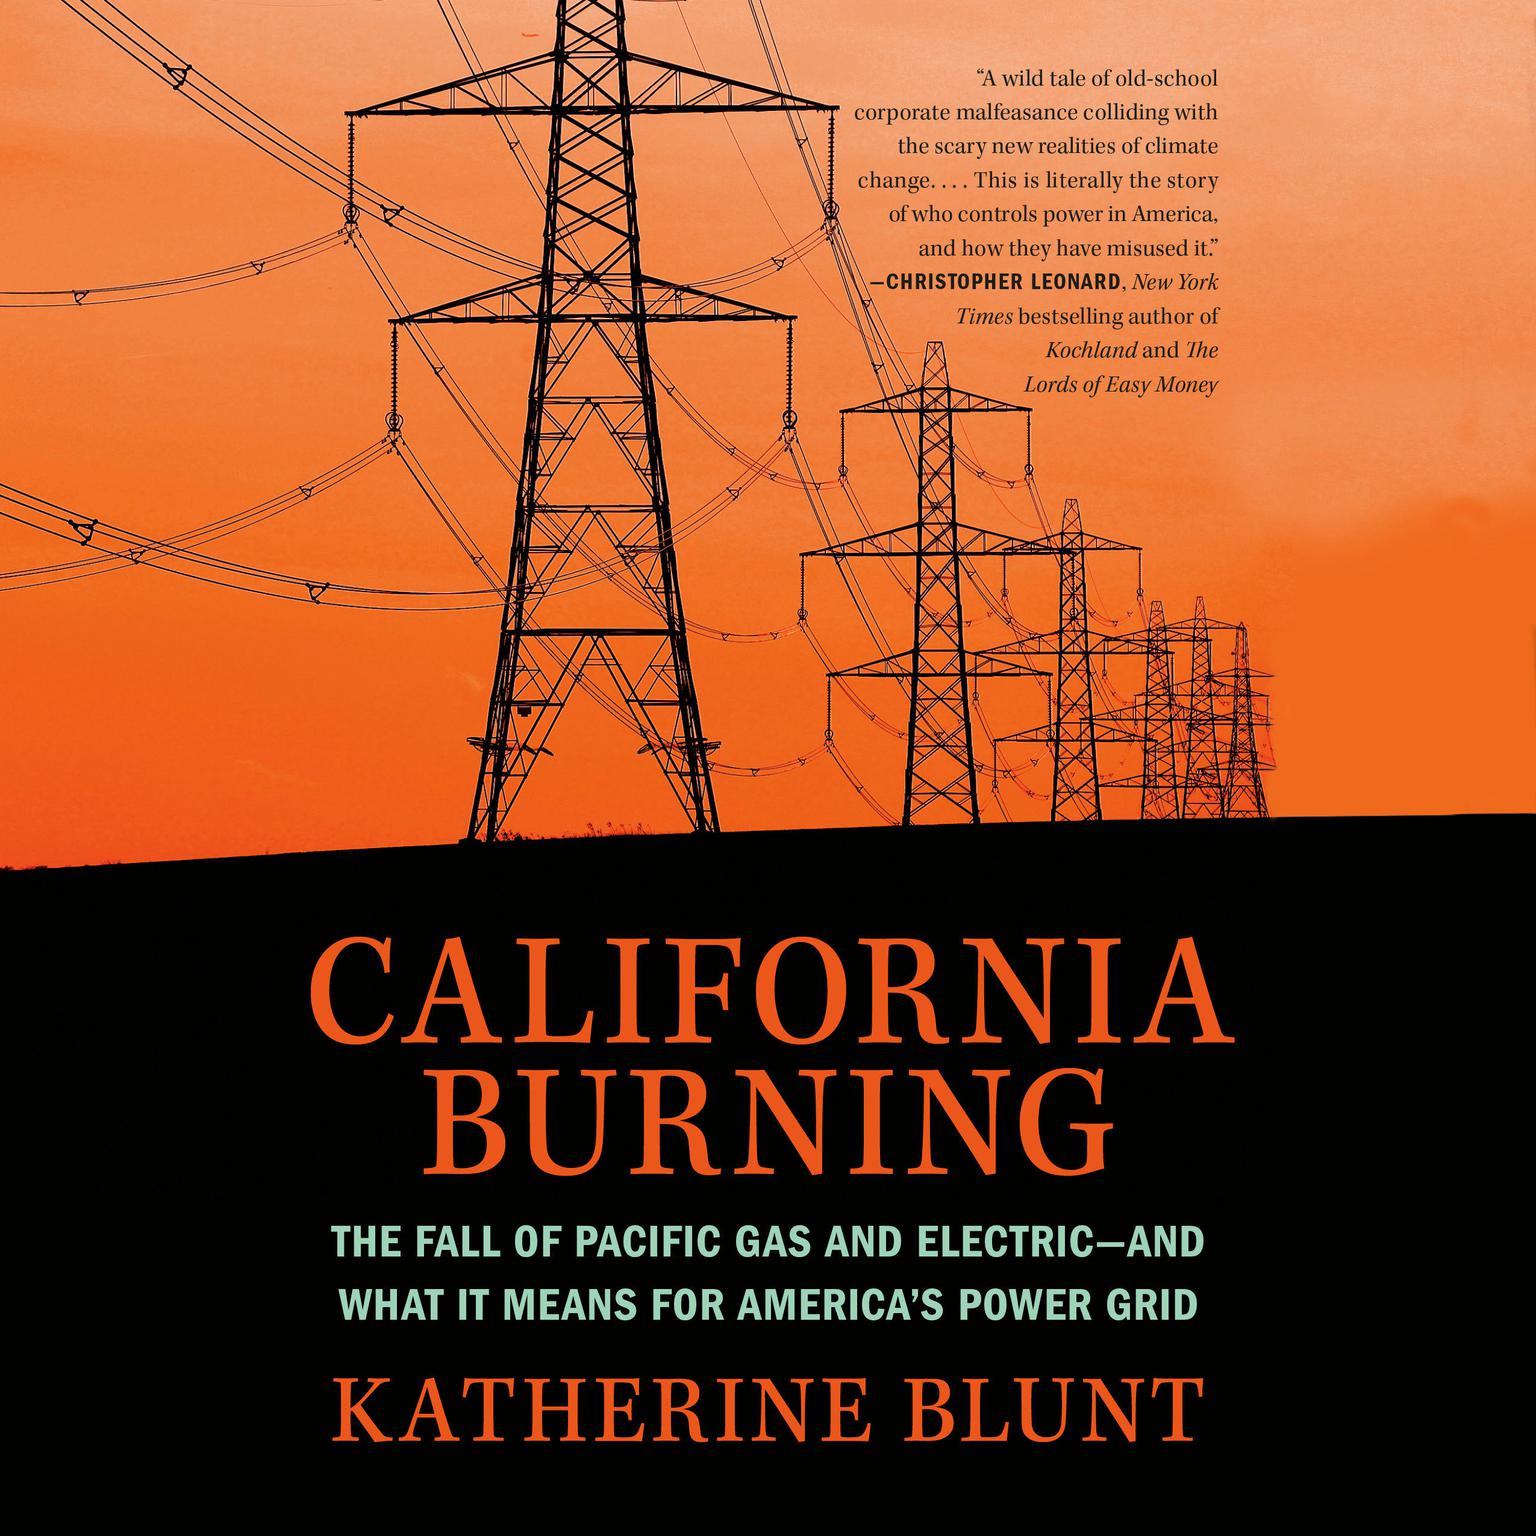 California Burning: The Fall of Pacific Gas and Electric--and What It Means for Americas Power Grid Audiobook, by Katherine Blunt